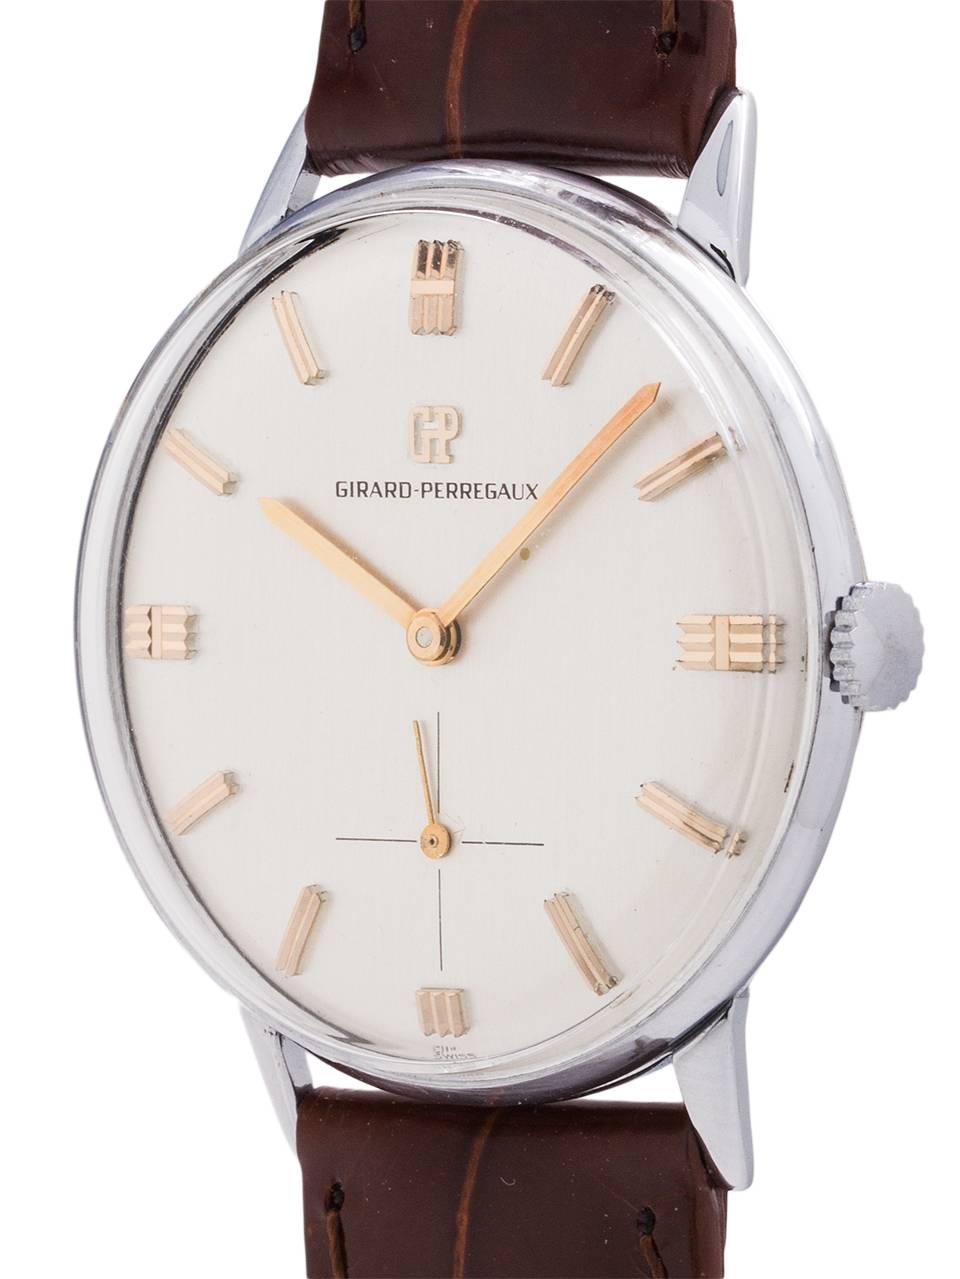 Girard Perregaux Stainless Steel Dress Model Manual Wind Wristwatch, circa 1960s In Excellent Condition For Sale In West Hollywood, CA